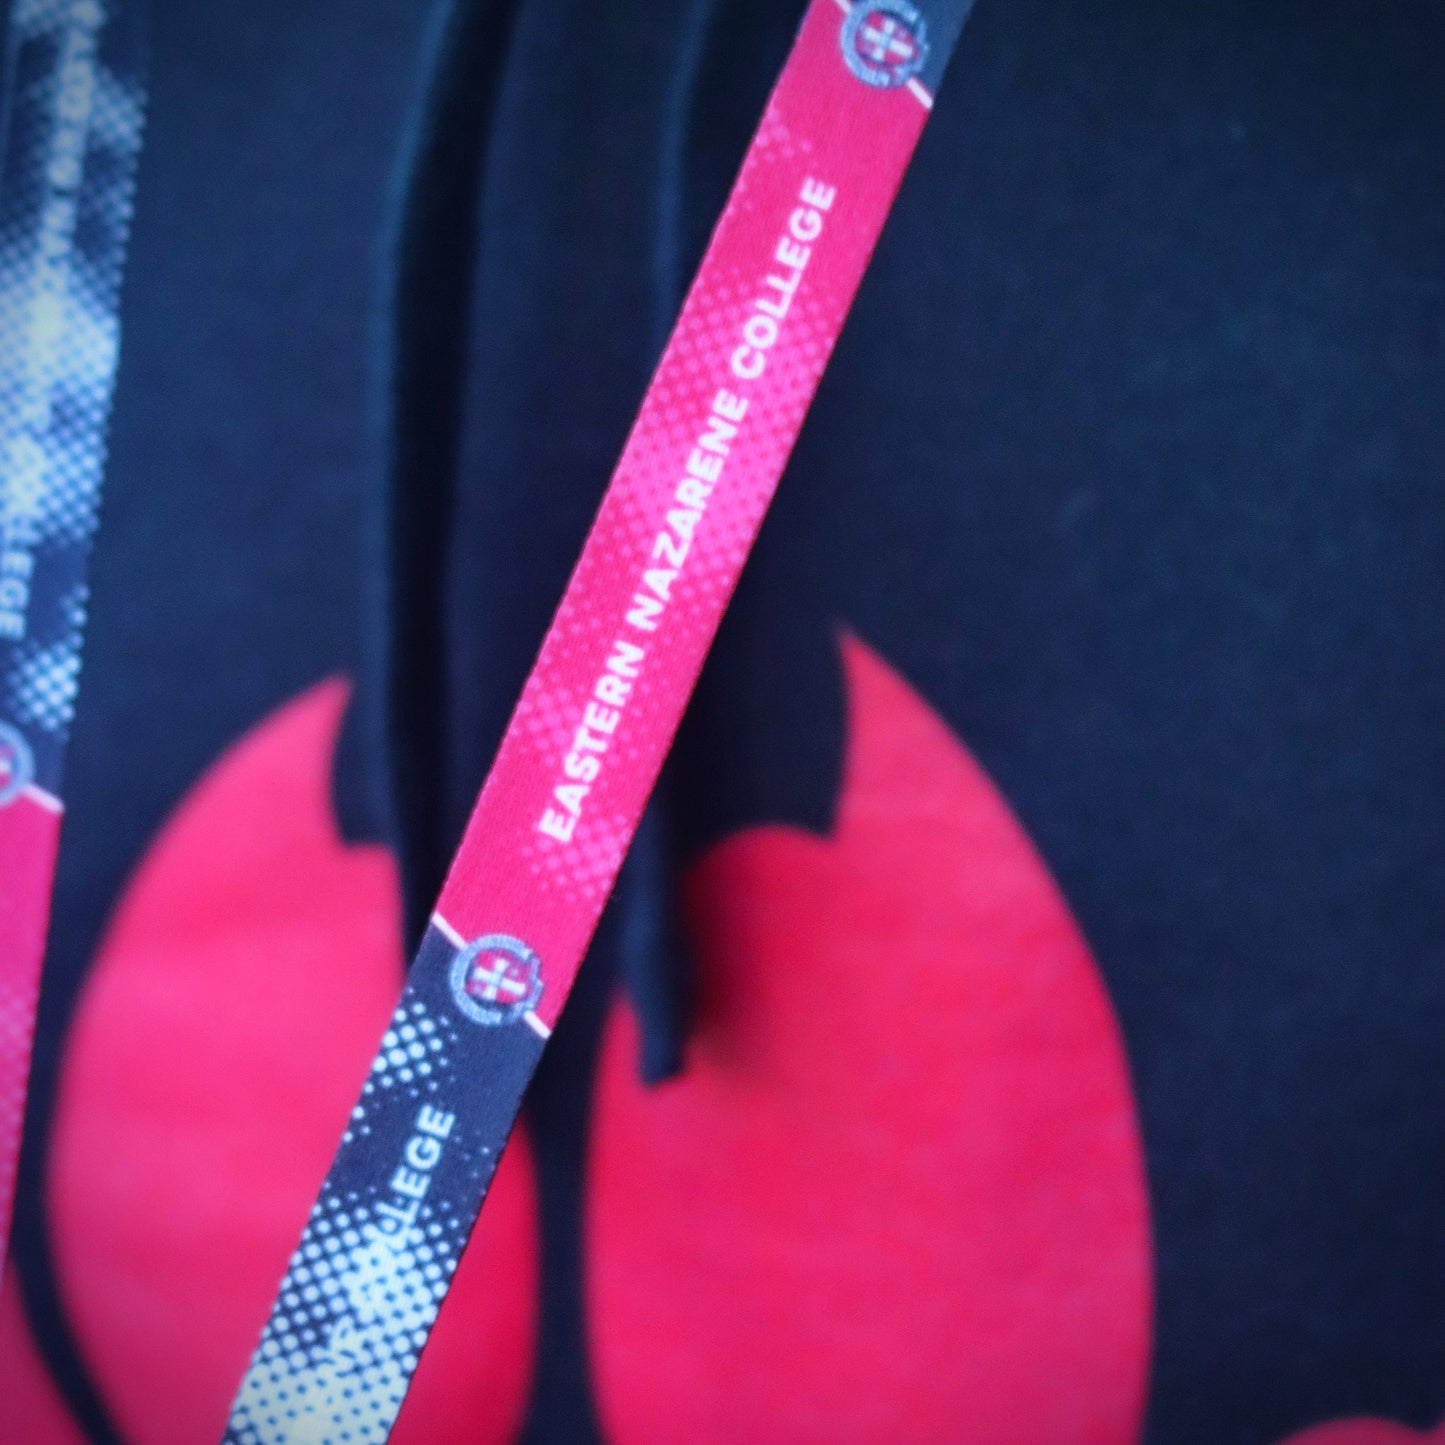 black and red lanyard